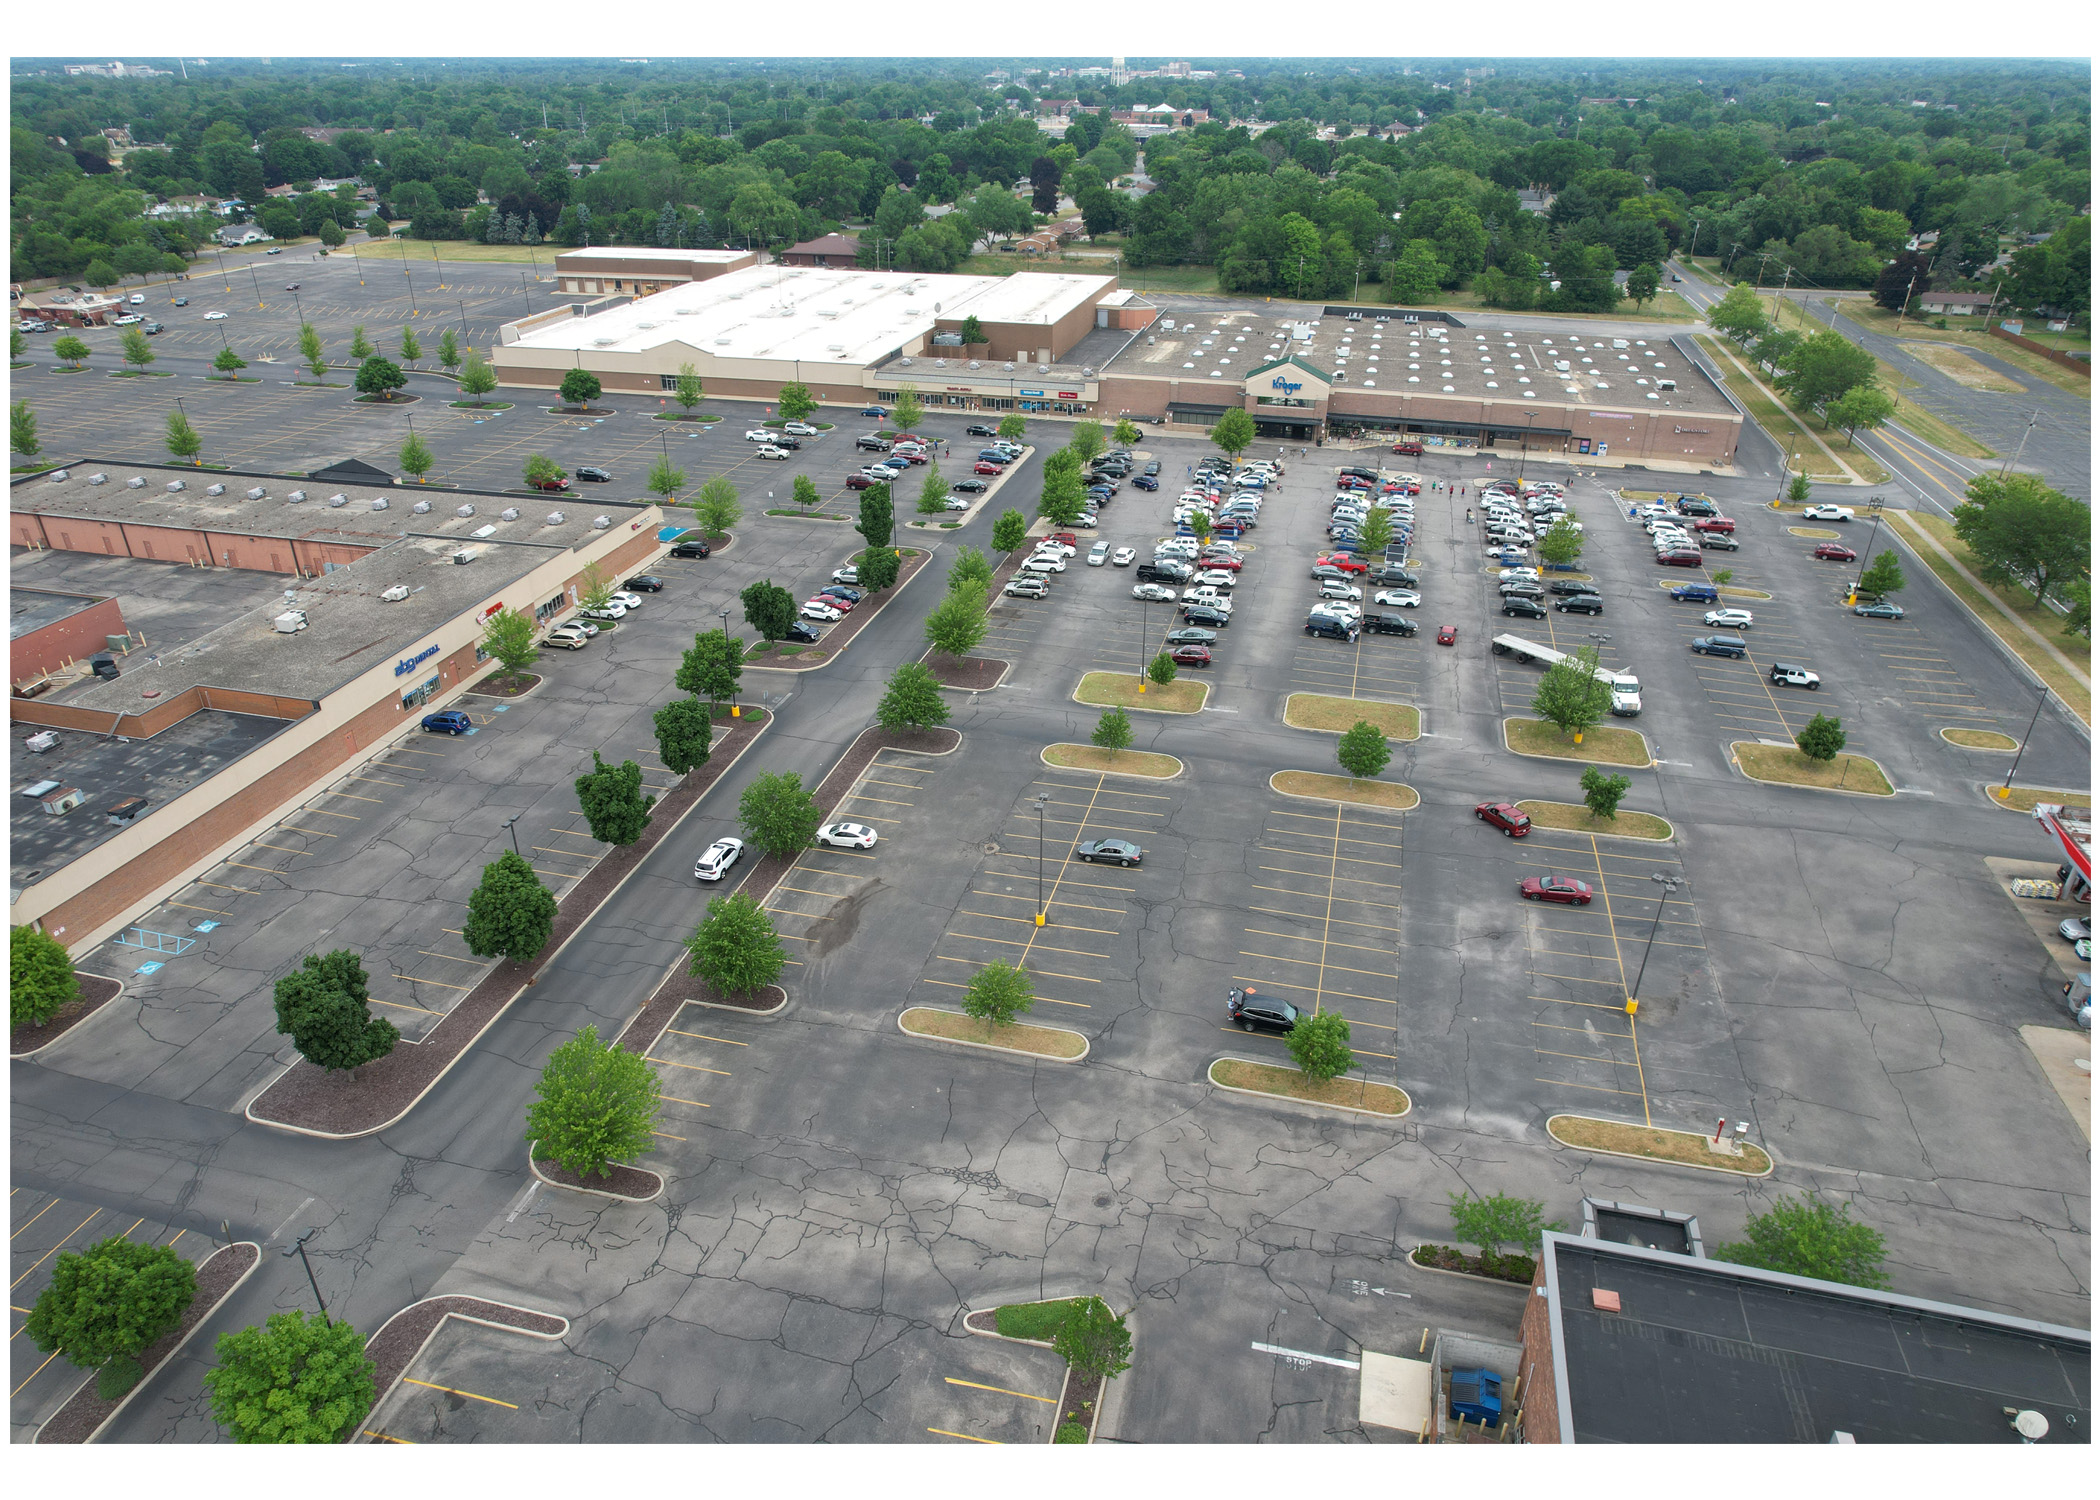 Woodland Crossing shopping center parking lot aerial view